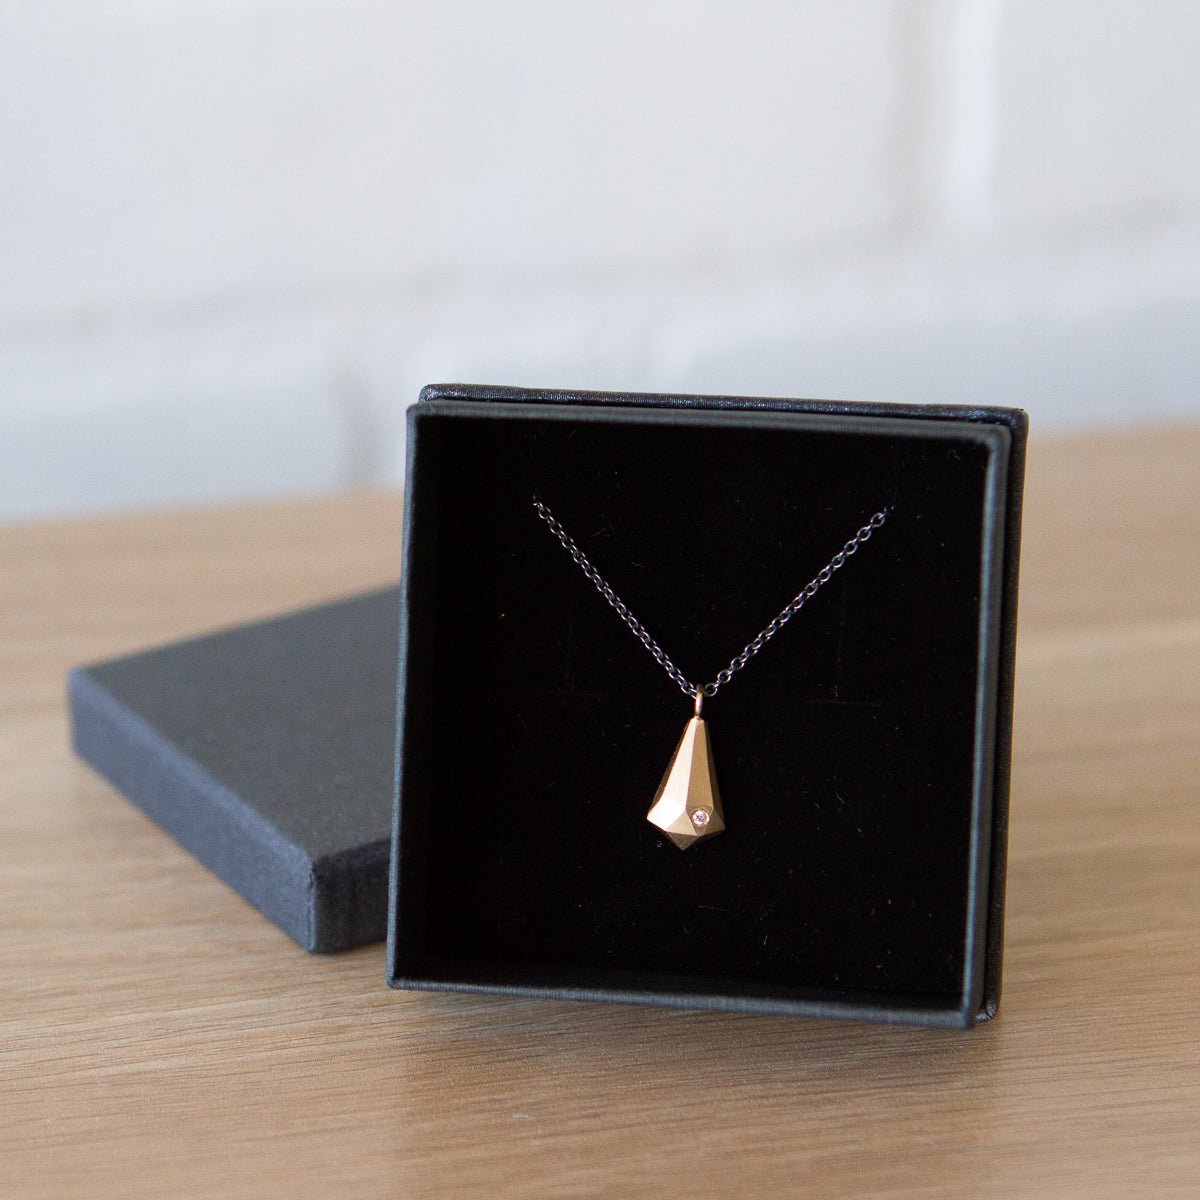 14k yellow gold faceted fragment pendant with a single diamond on an oxidized silver chain in a gift box